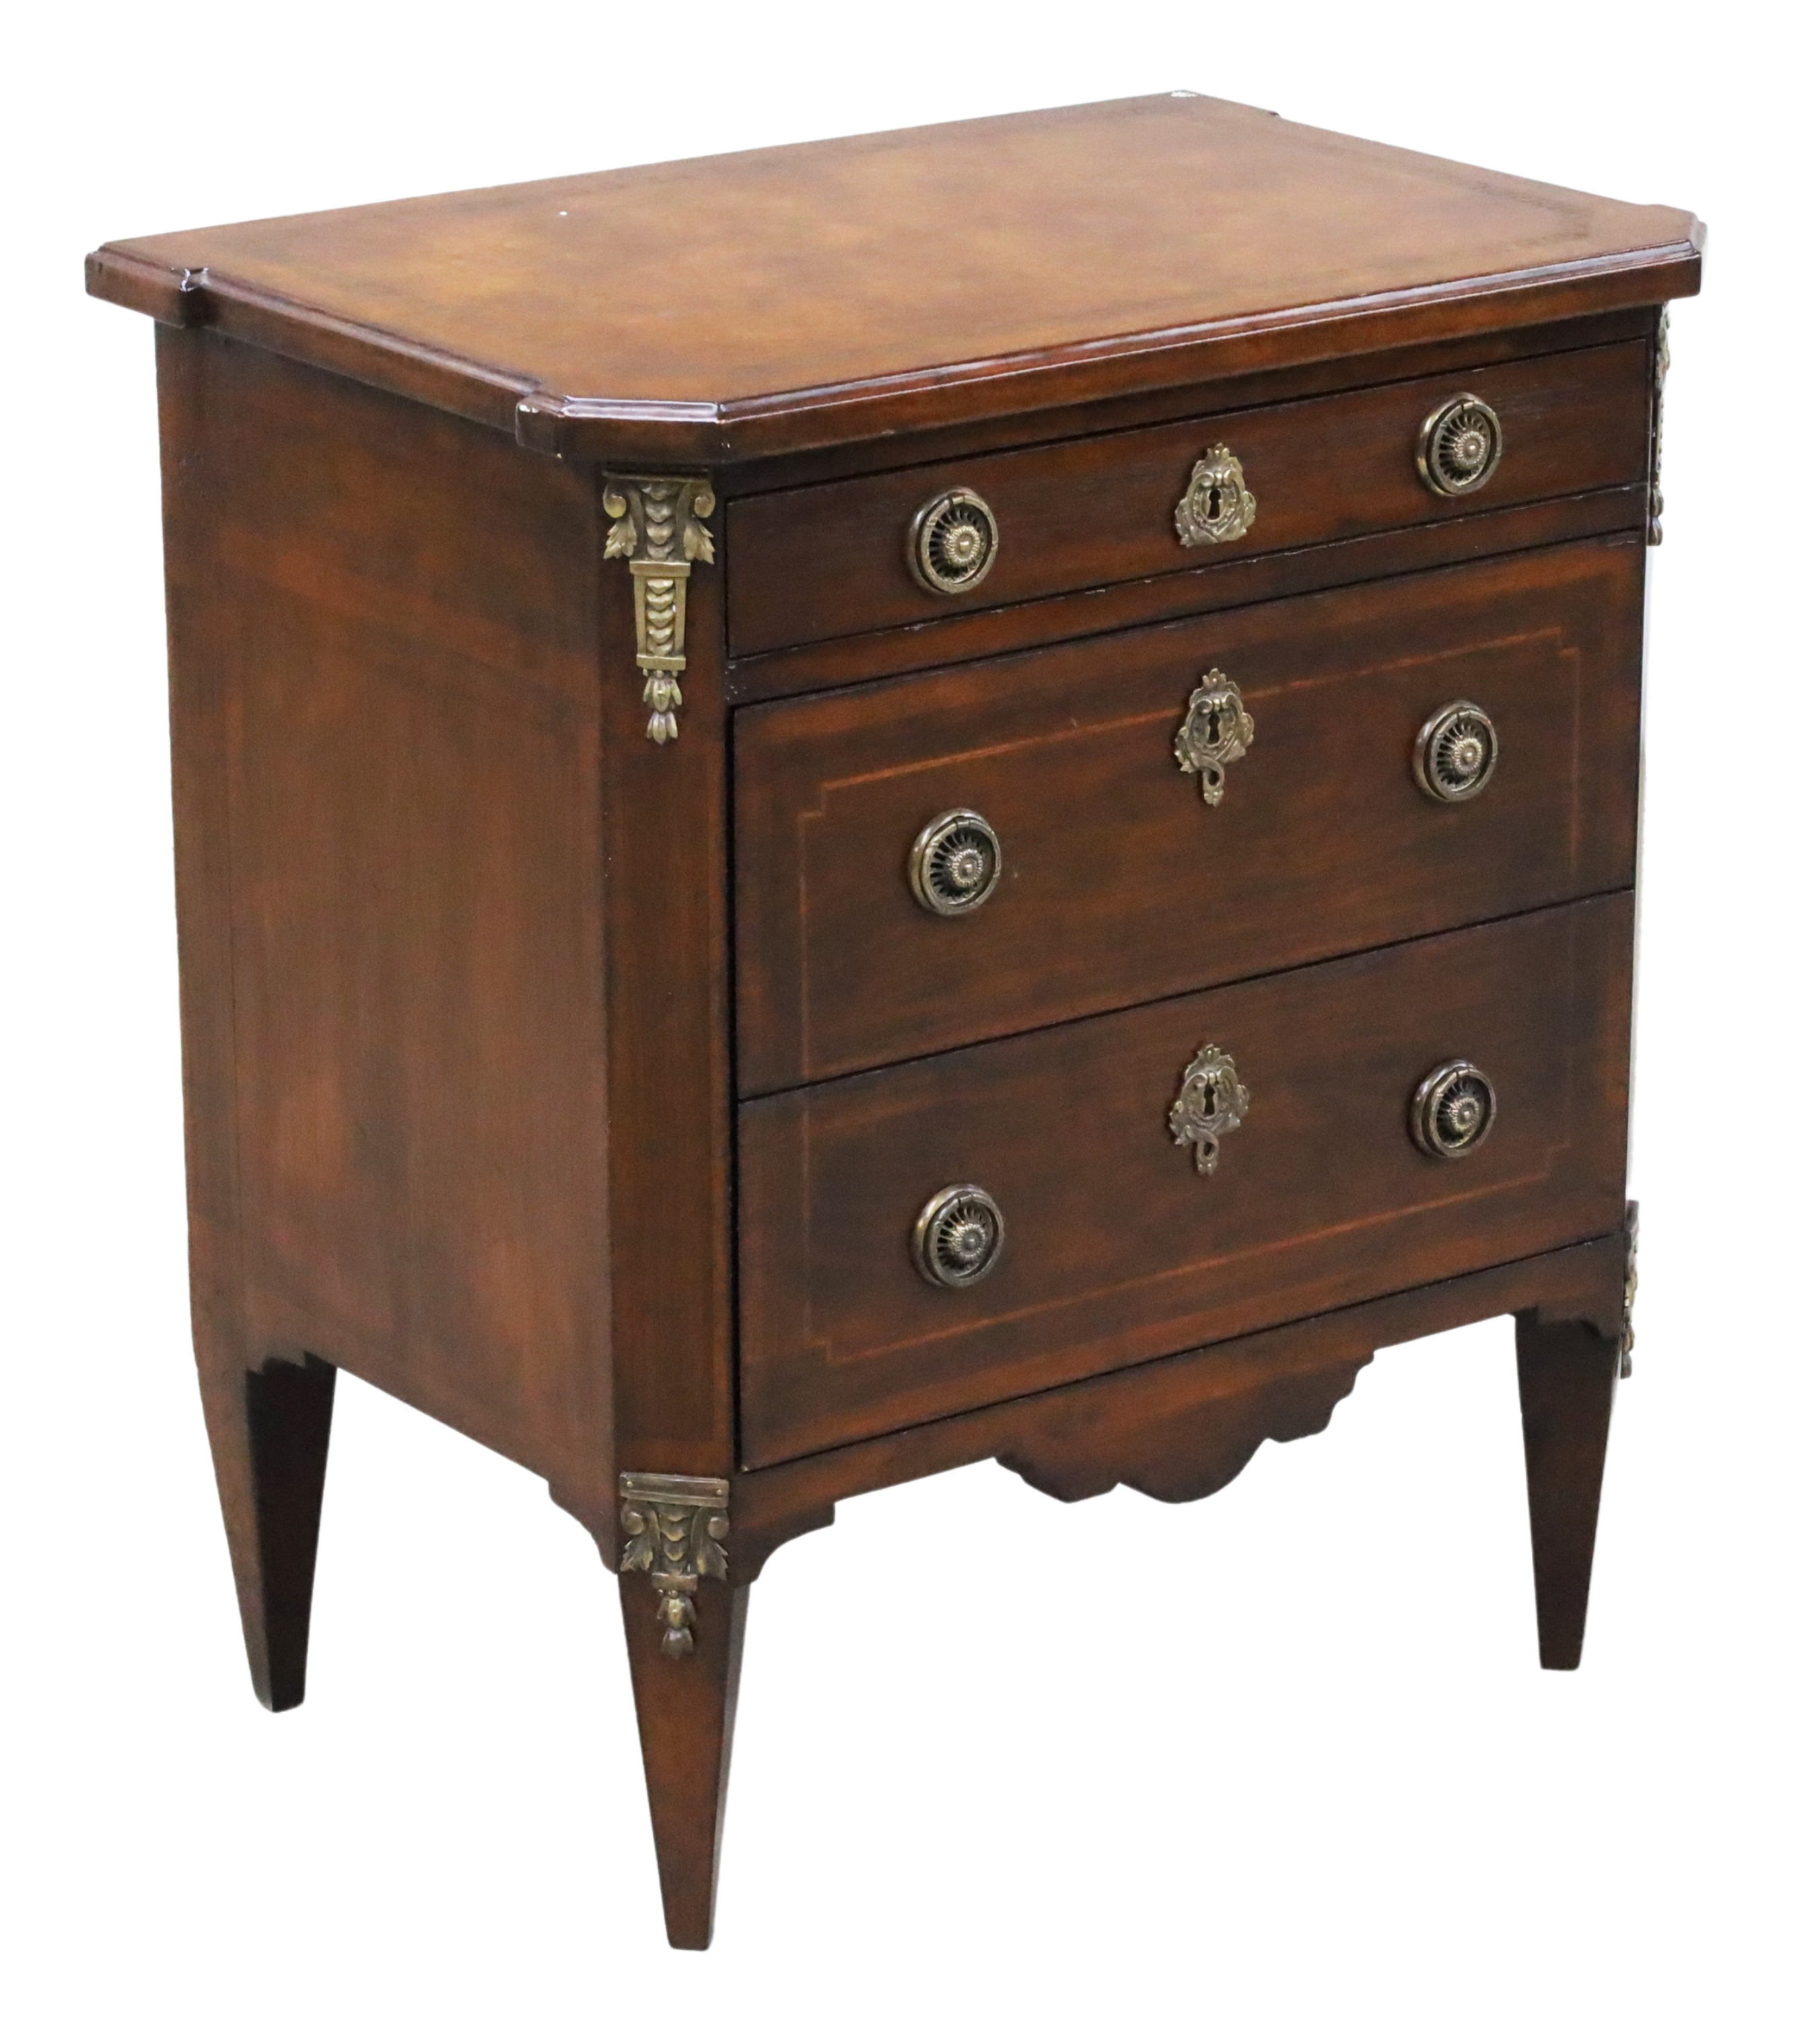 FRENCH STYLE 3 DRAWER COMMODE Decorative 35dfa5